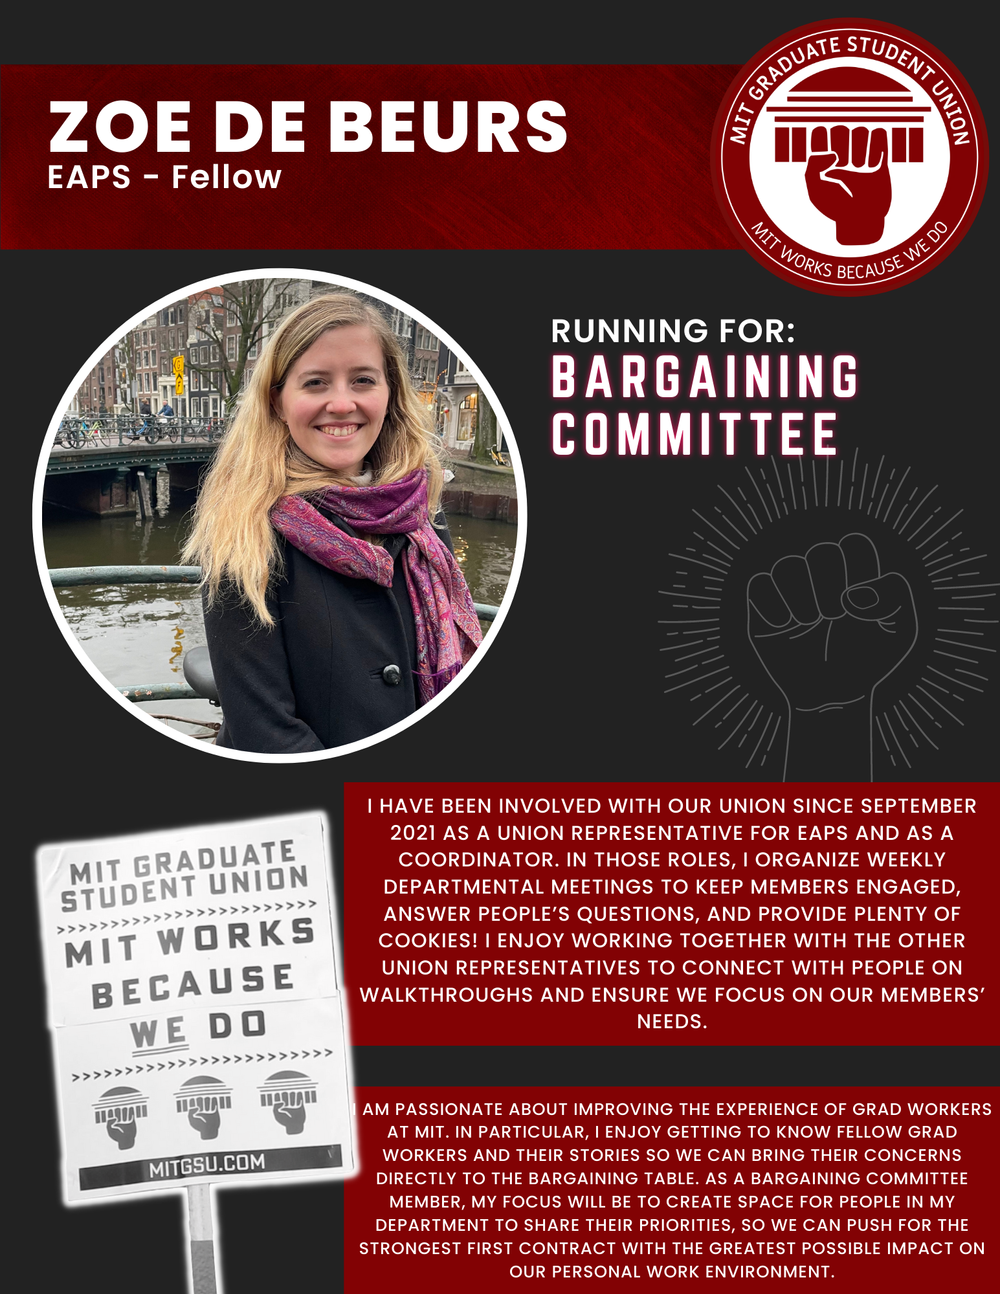  ZOE DE BEURS EAPS - Fellow   RUNNING FOR: Bargaining Committee  I HAVE BEEN INVOLVED WITH OUR UNION SINCE SEPTEMBER 2021 AS A UNION REPRESENTATIVE FOR EAPS AND AS A COORDINATOR. IN THOSE ROLES, I ORGANIZE WEEKLY DEPARTMENTAL MEETINGS TO KEEP MEMBERS